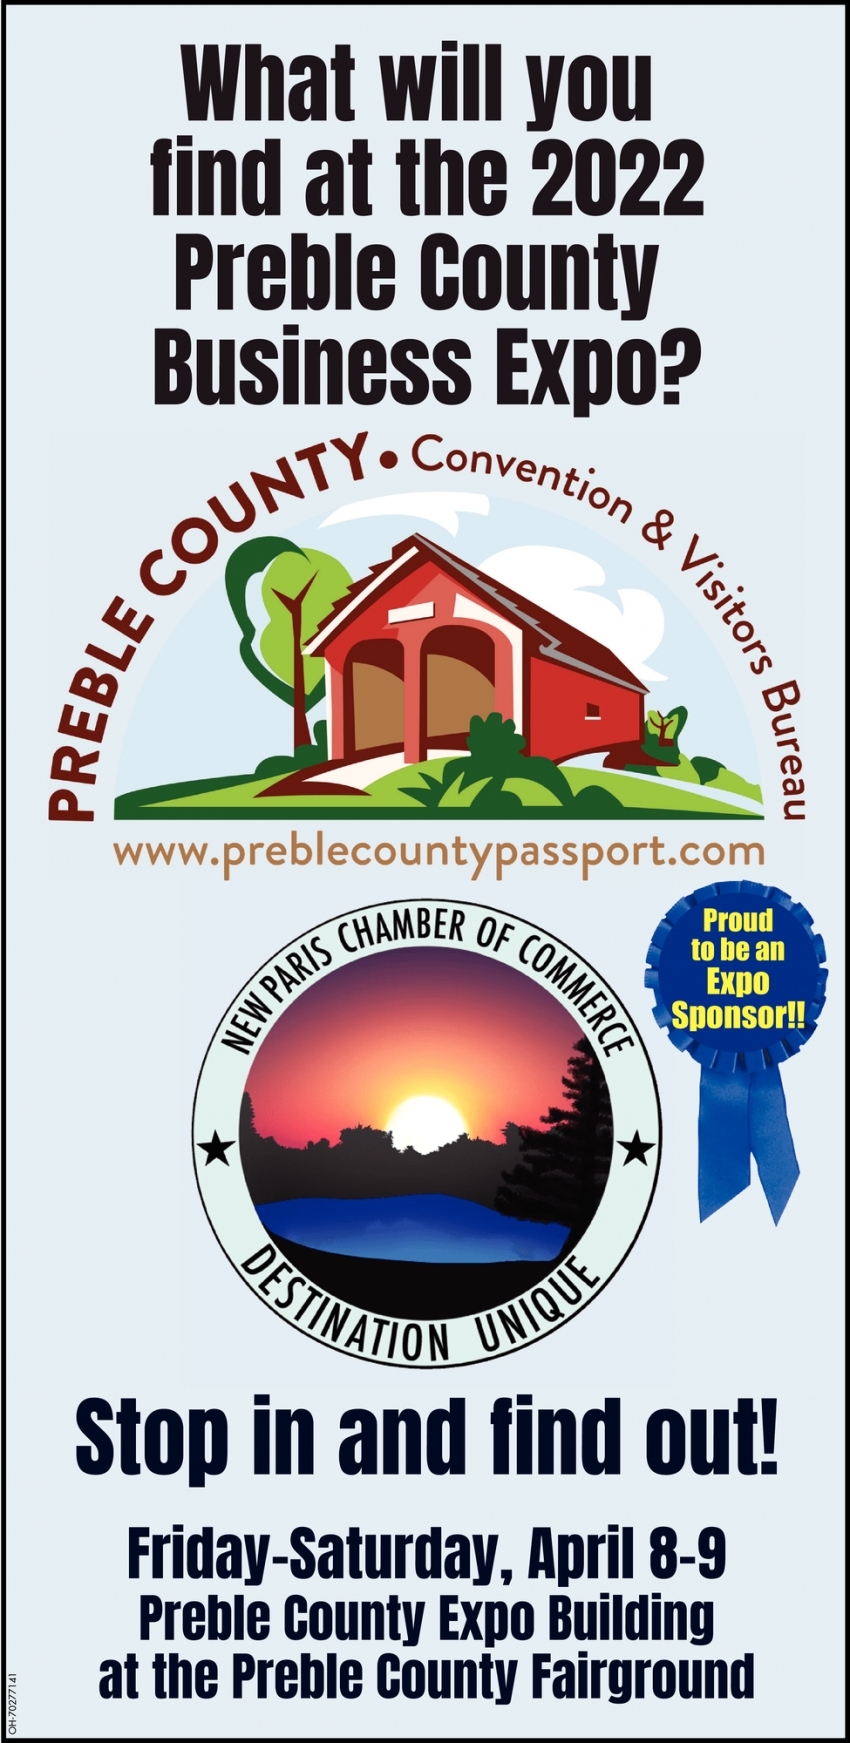 What Will You Find at The 2022 Preble County Business Expo?